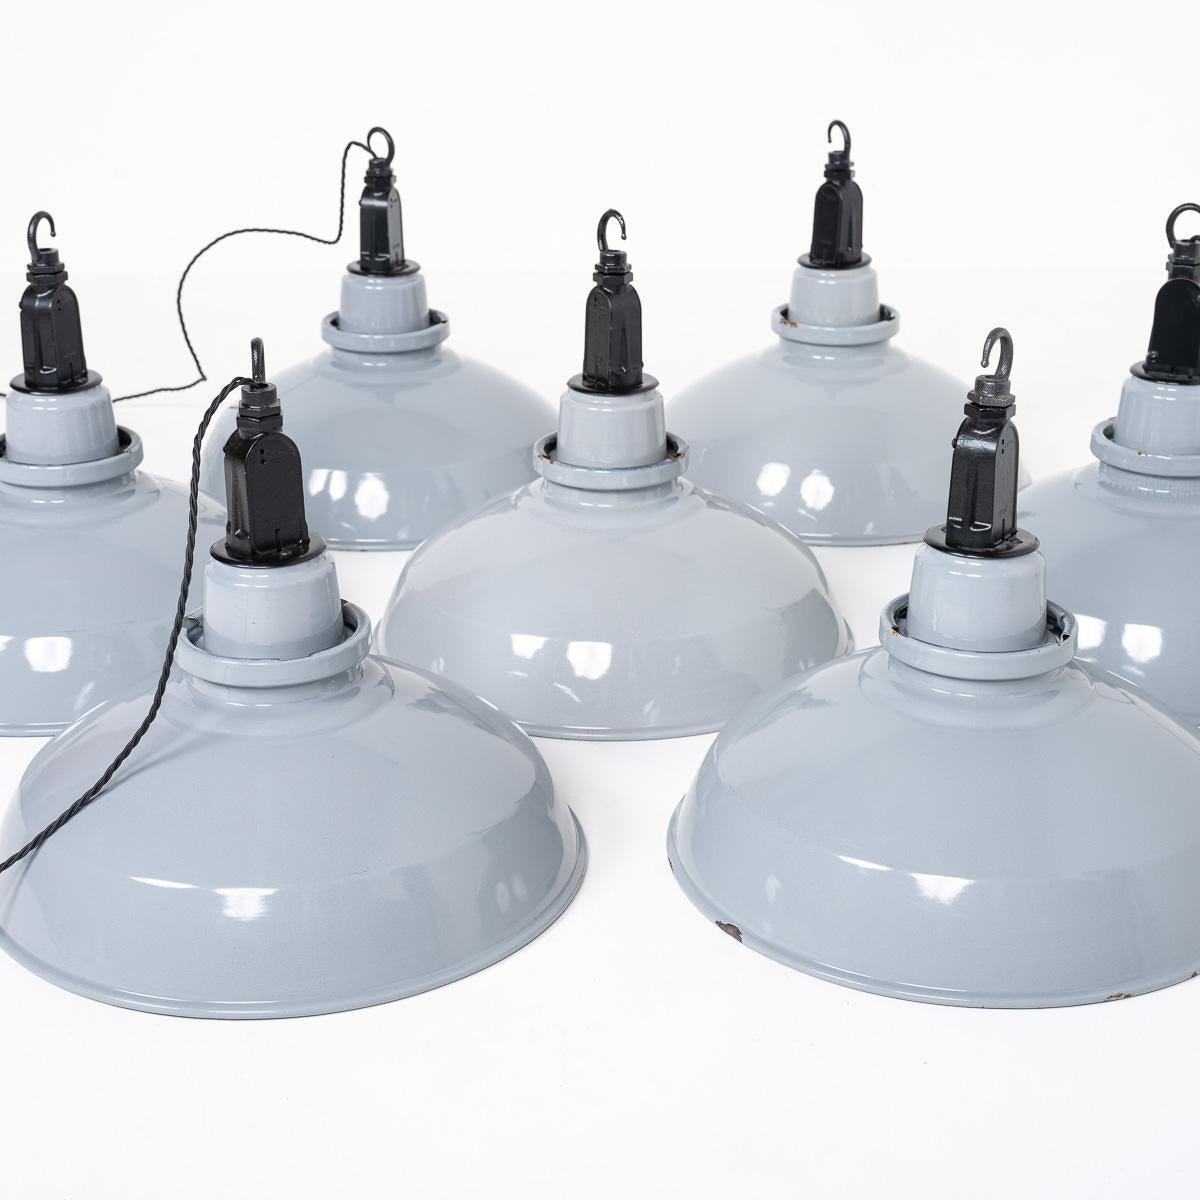 Reclaimed Grey Enamel Factory Pendant Lights with Black Fittings by Thorlux For Sale 2